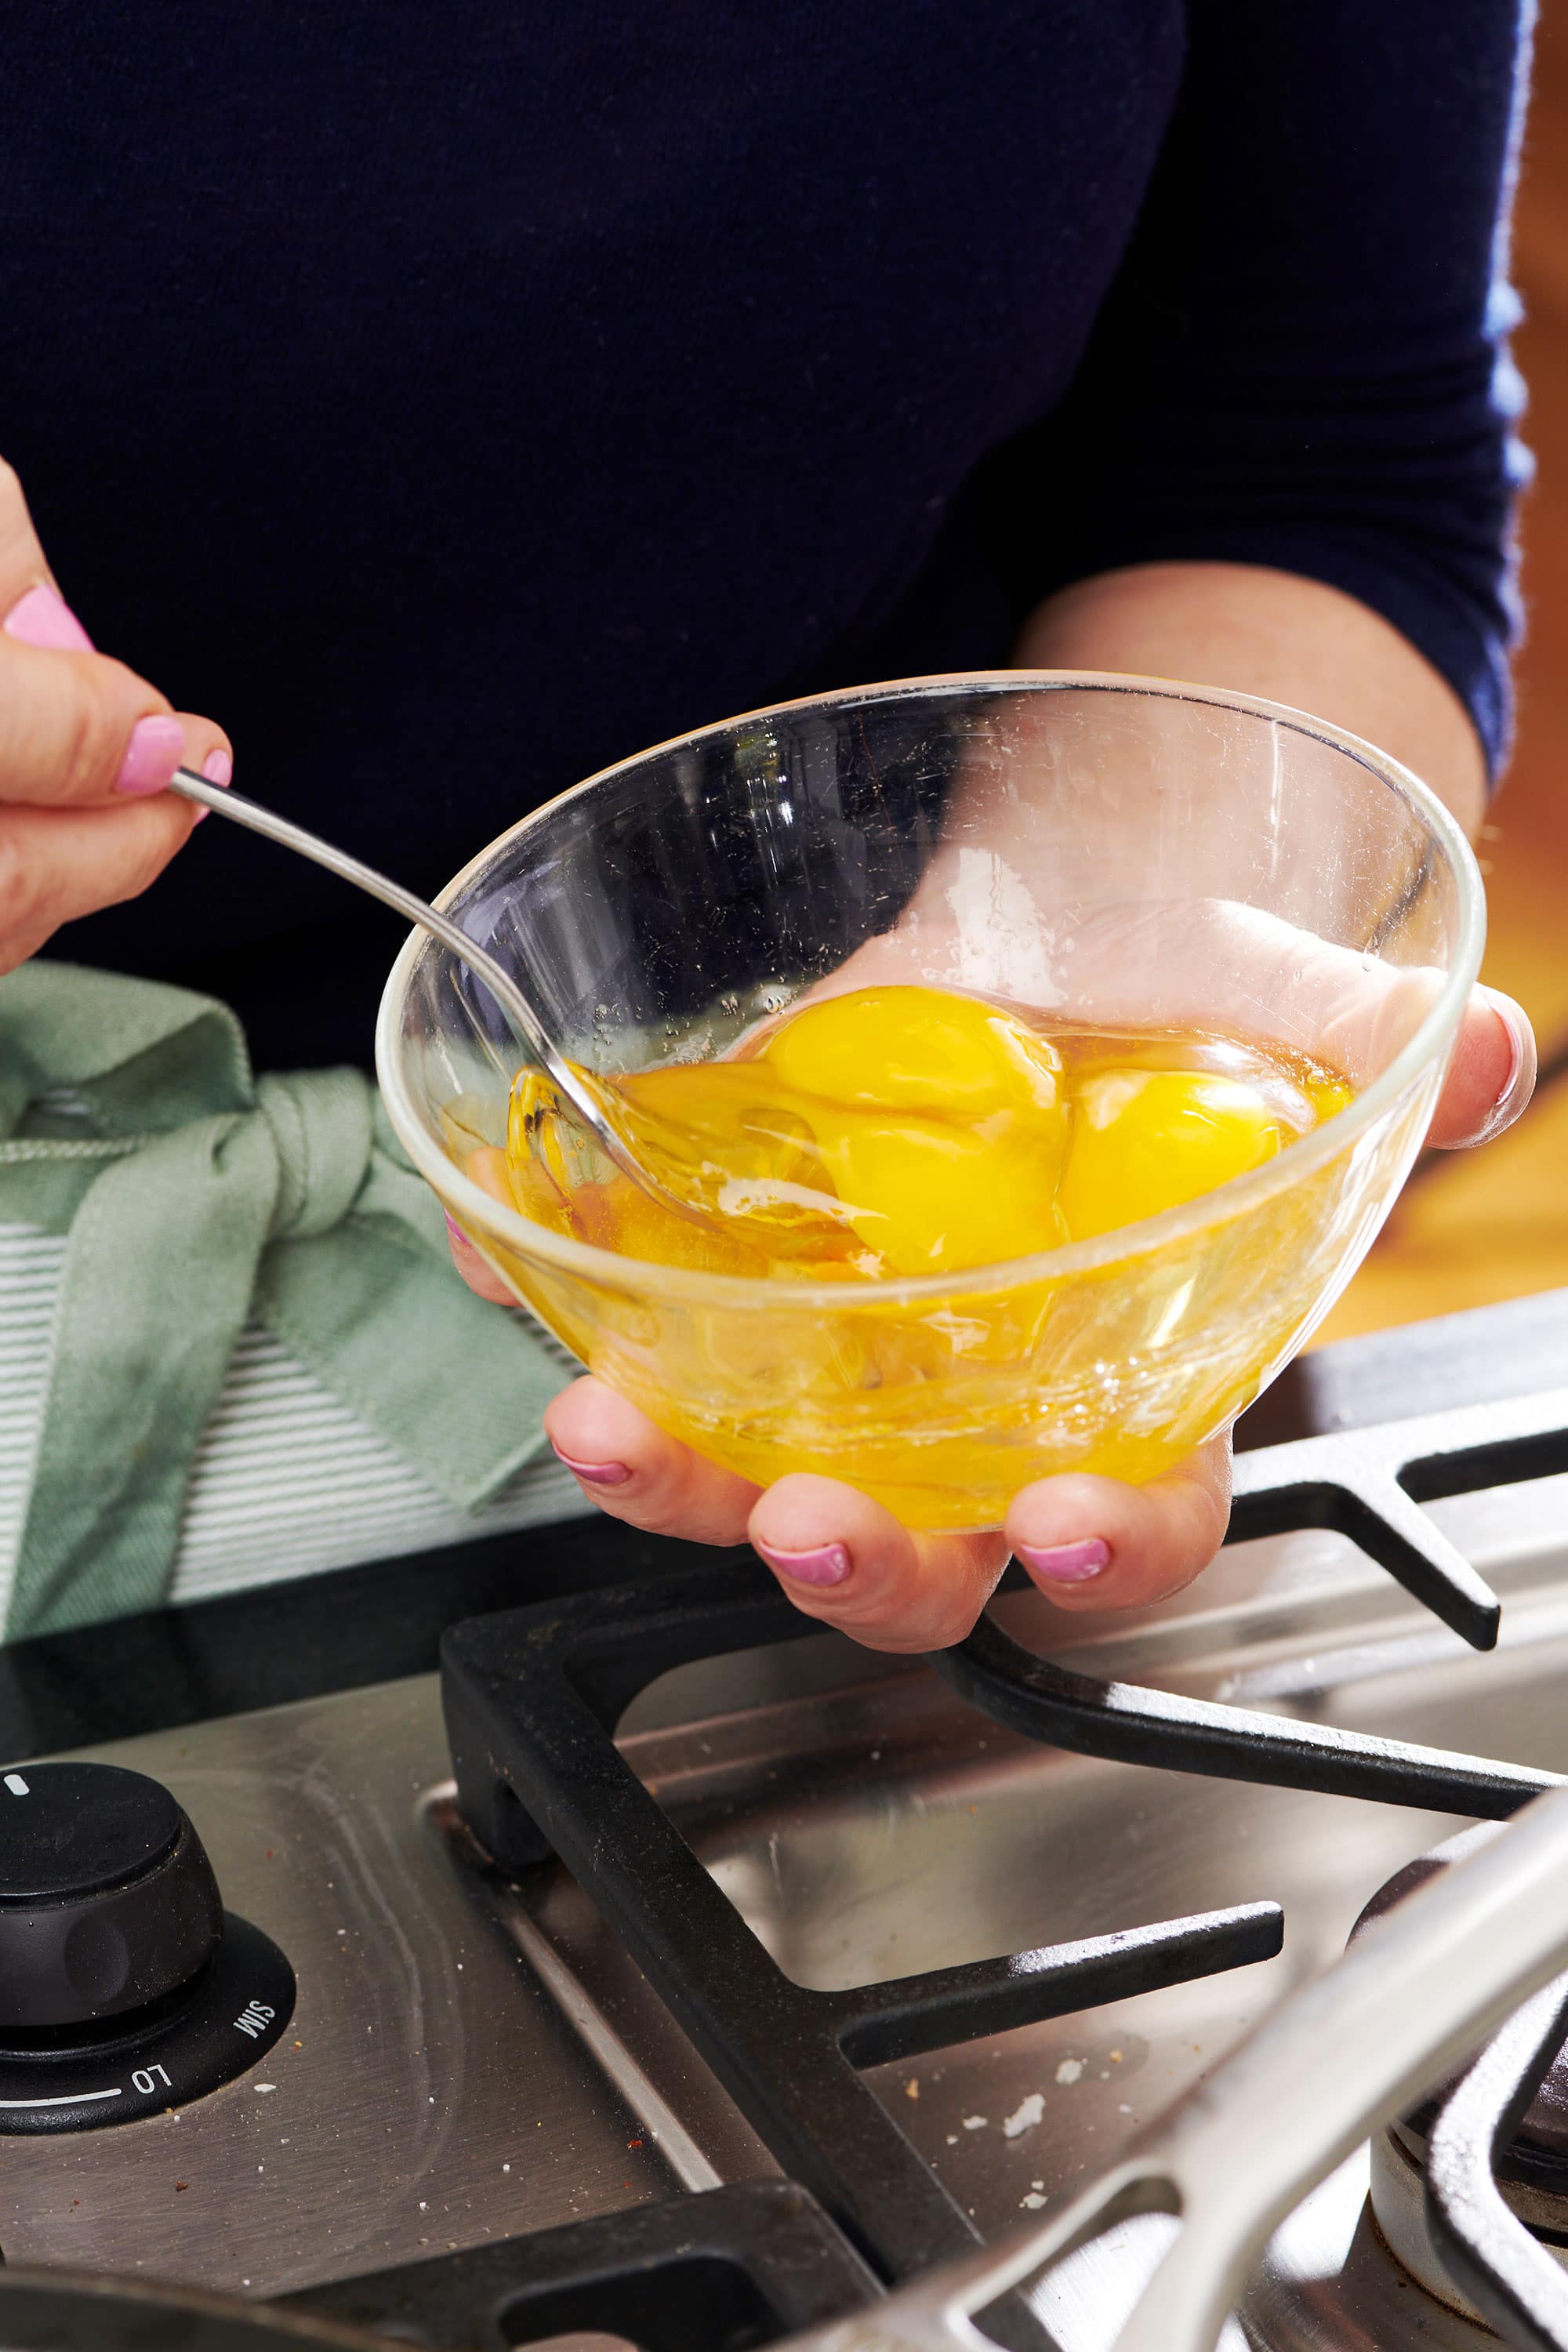 Woman holding a glass bowl of eggs.